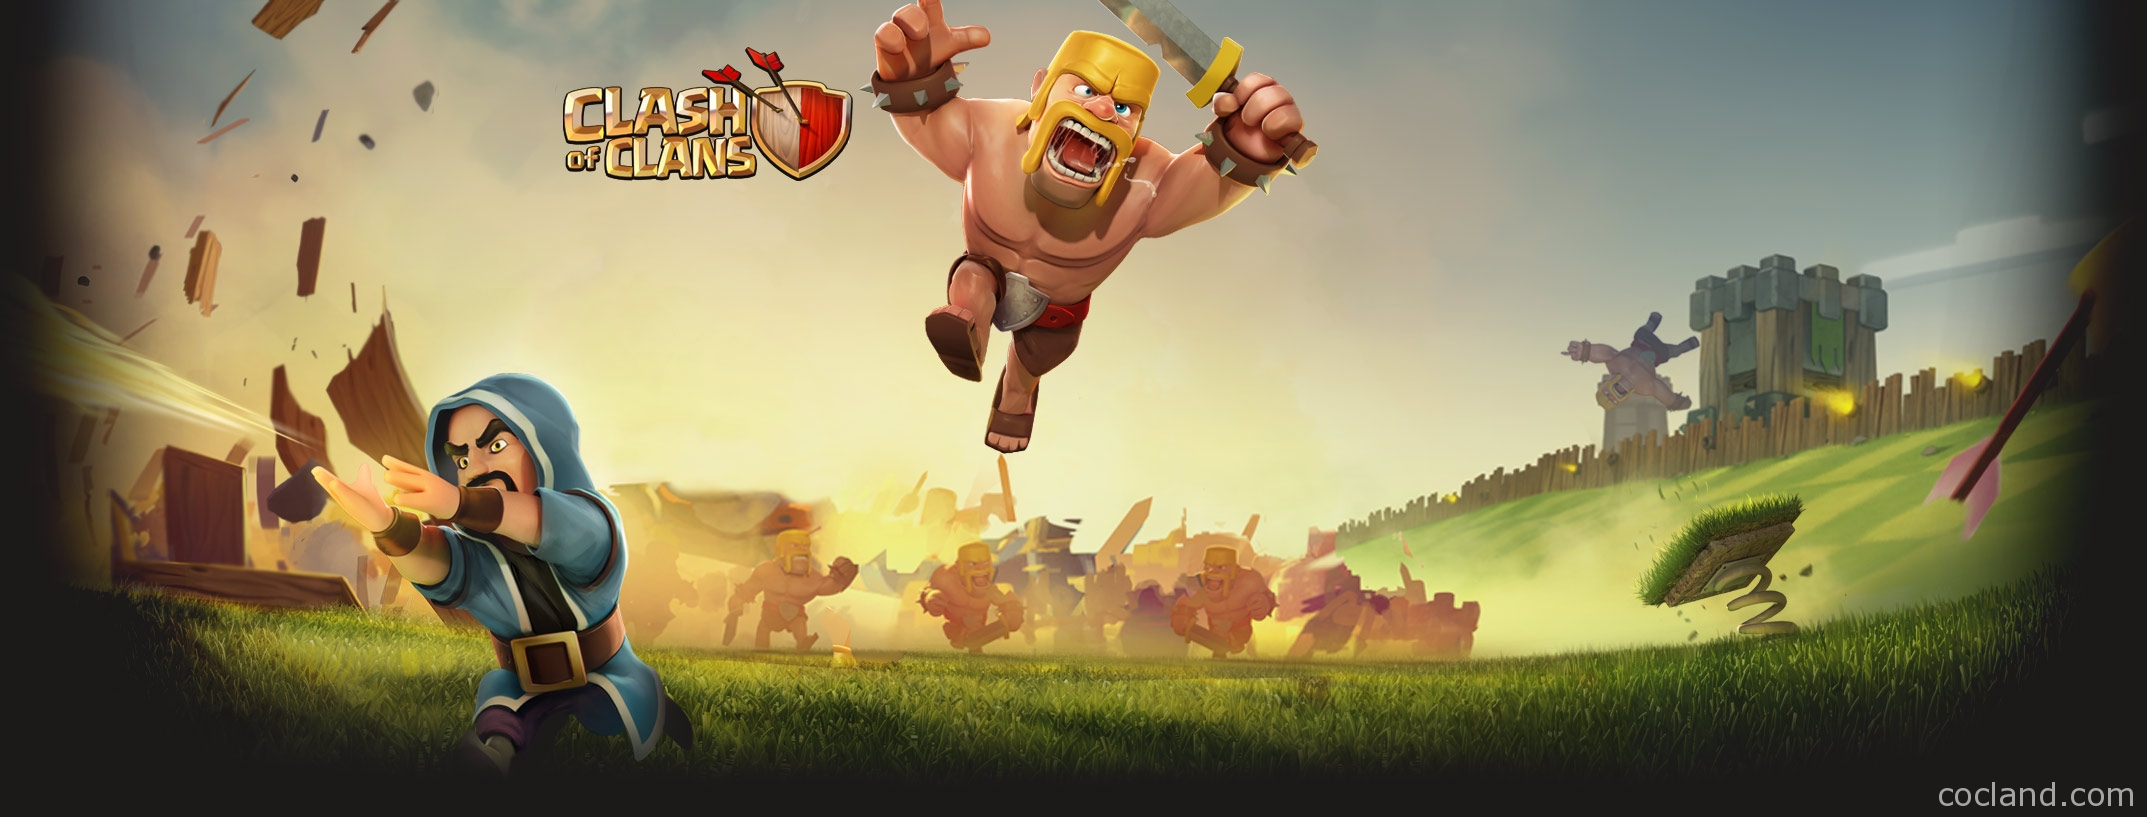 Clash of Clans Wallpapers on WallpaperDog